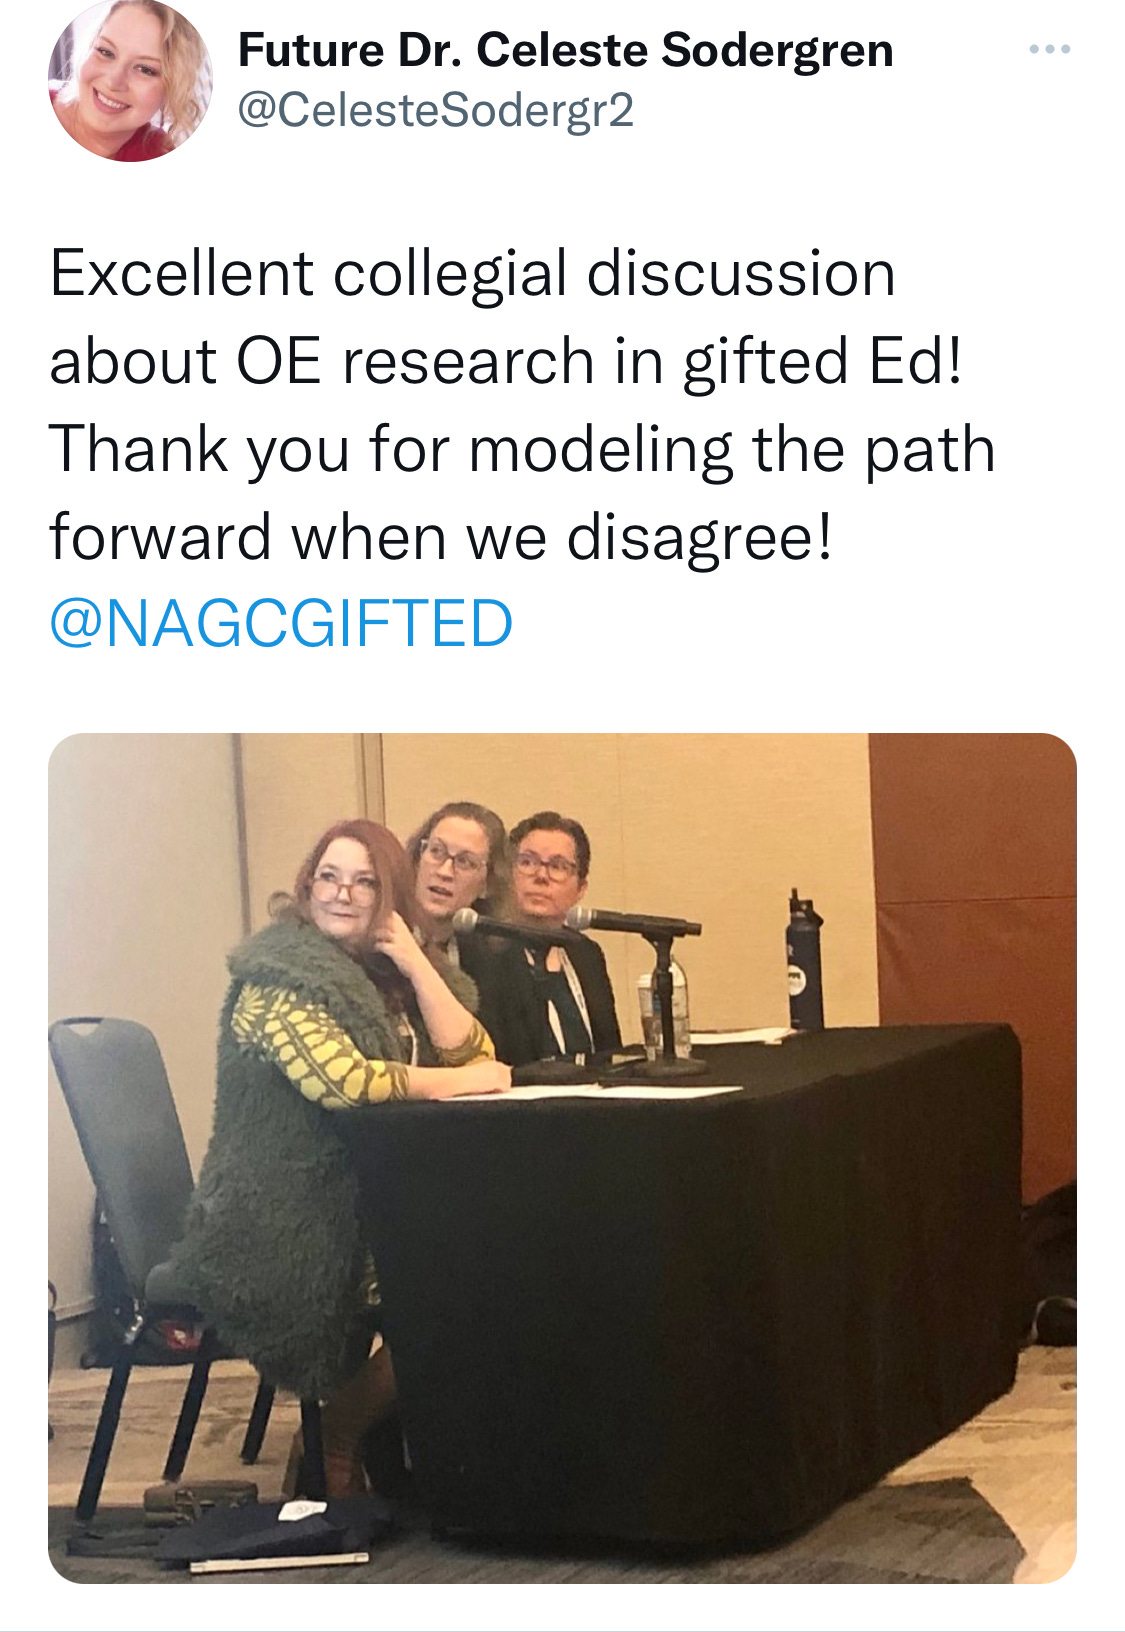 Image description: tweet from Celeste Sodergren, "Excellent collegial discussion about OE research in Gifted Ed! Thank you for modeling the path forward when we disagree! @NAGCGIFTED." Photo of Erin, Anne, and Chris looking at a slide off screen. 